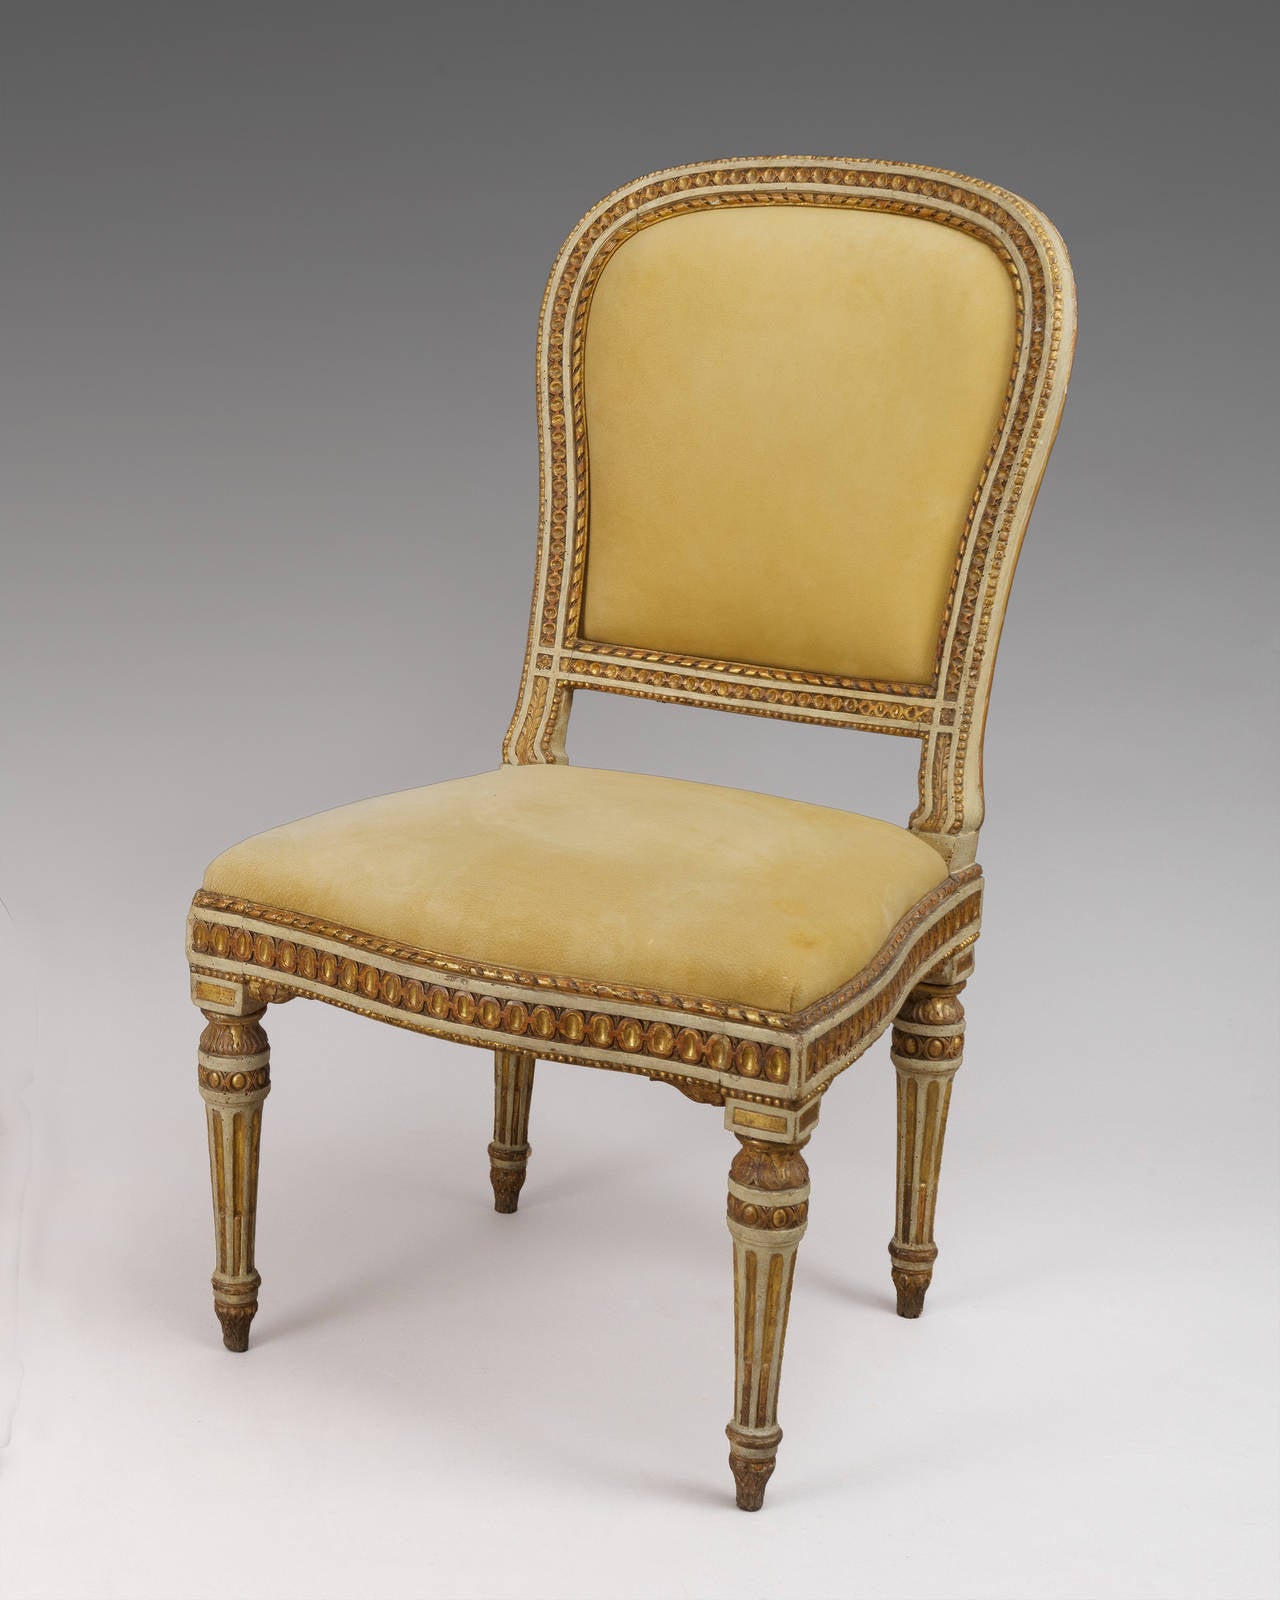 A pair of finely painted, carved and gilded chairs, of generous proportion with drop in seats and backs; with original paint and gilding. 
Emilia, Italy circa 1780